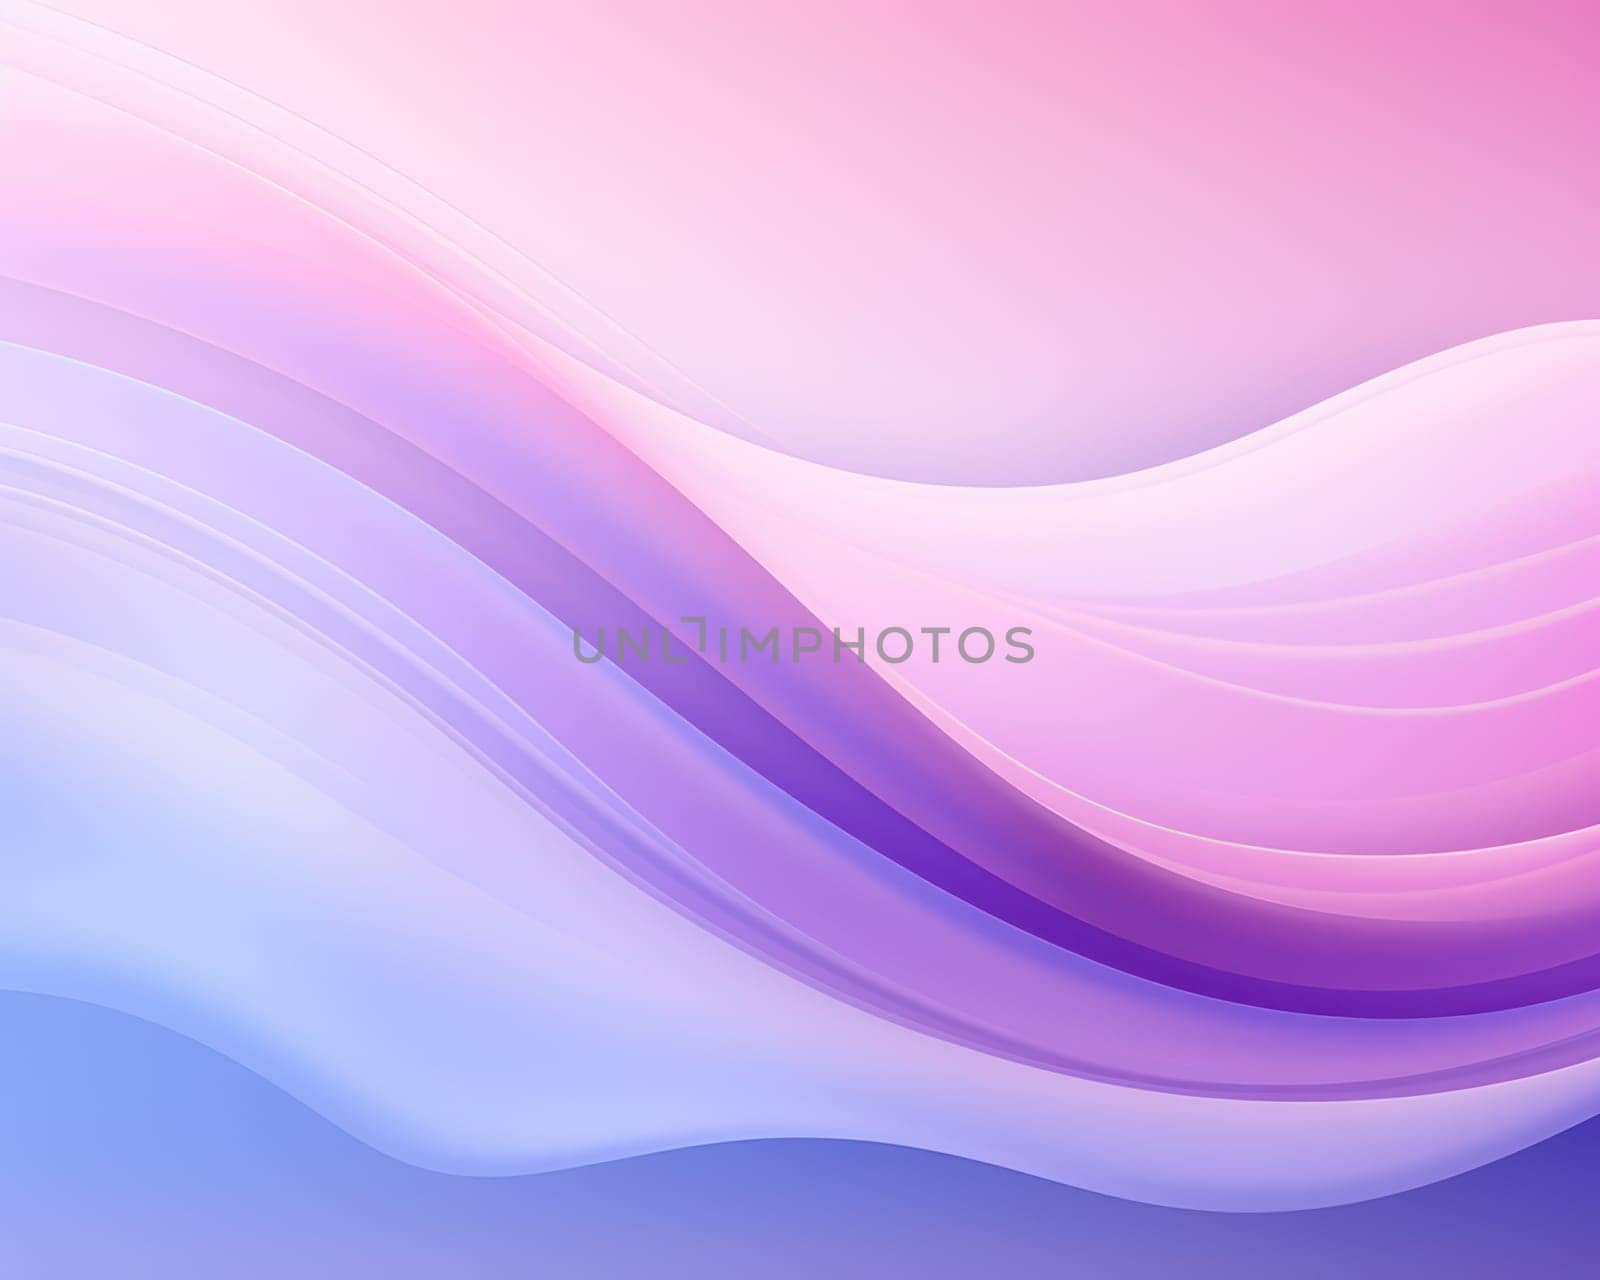 Fluid Waves in Futuristic Gradient: Abstract, Modern, and Dynamic Illustration on a Vibrant Blue Background